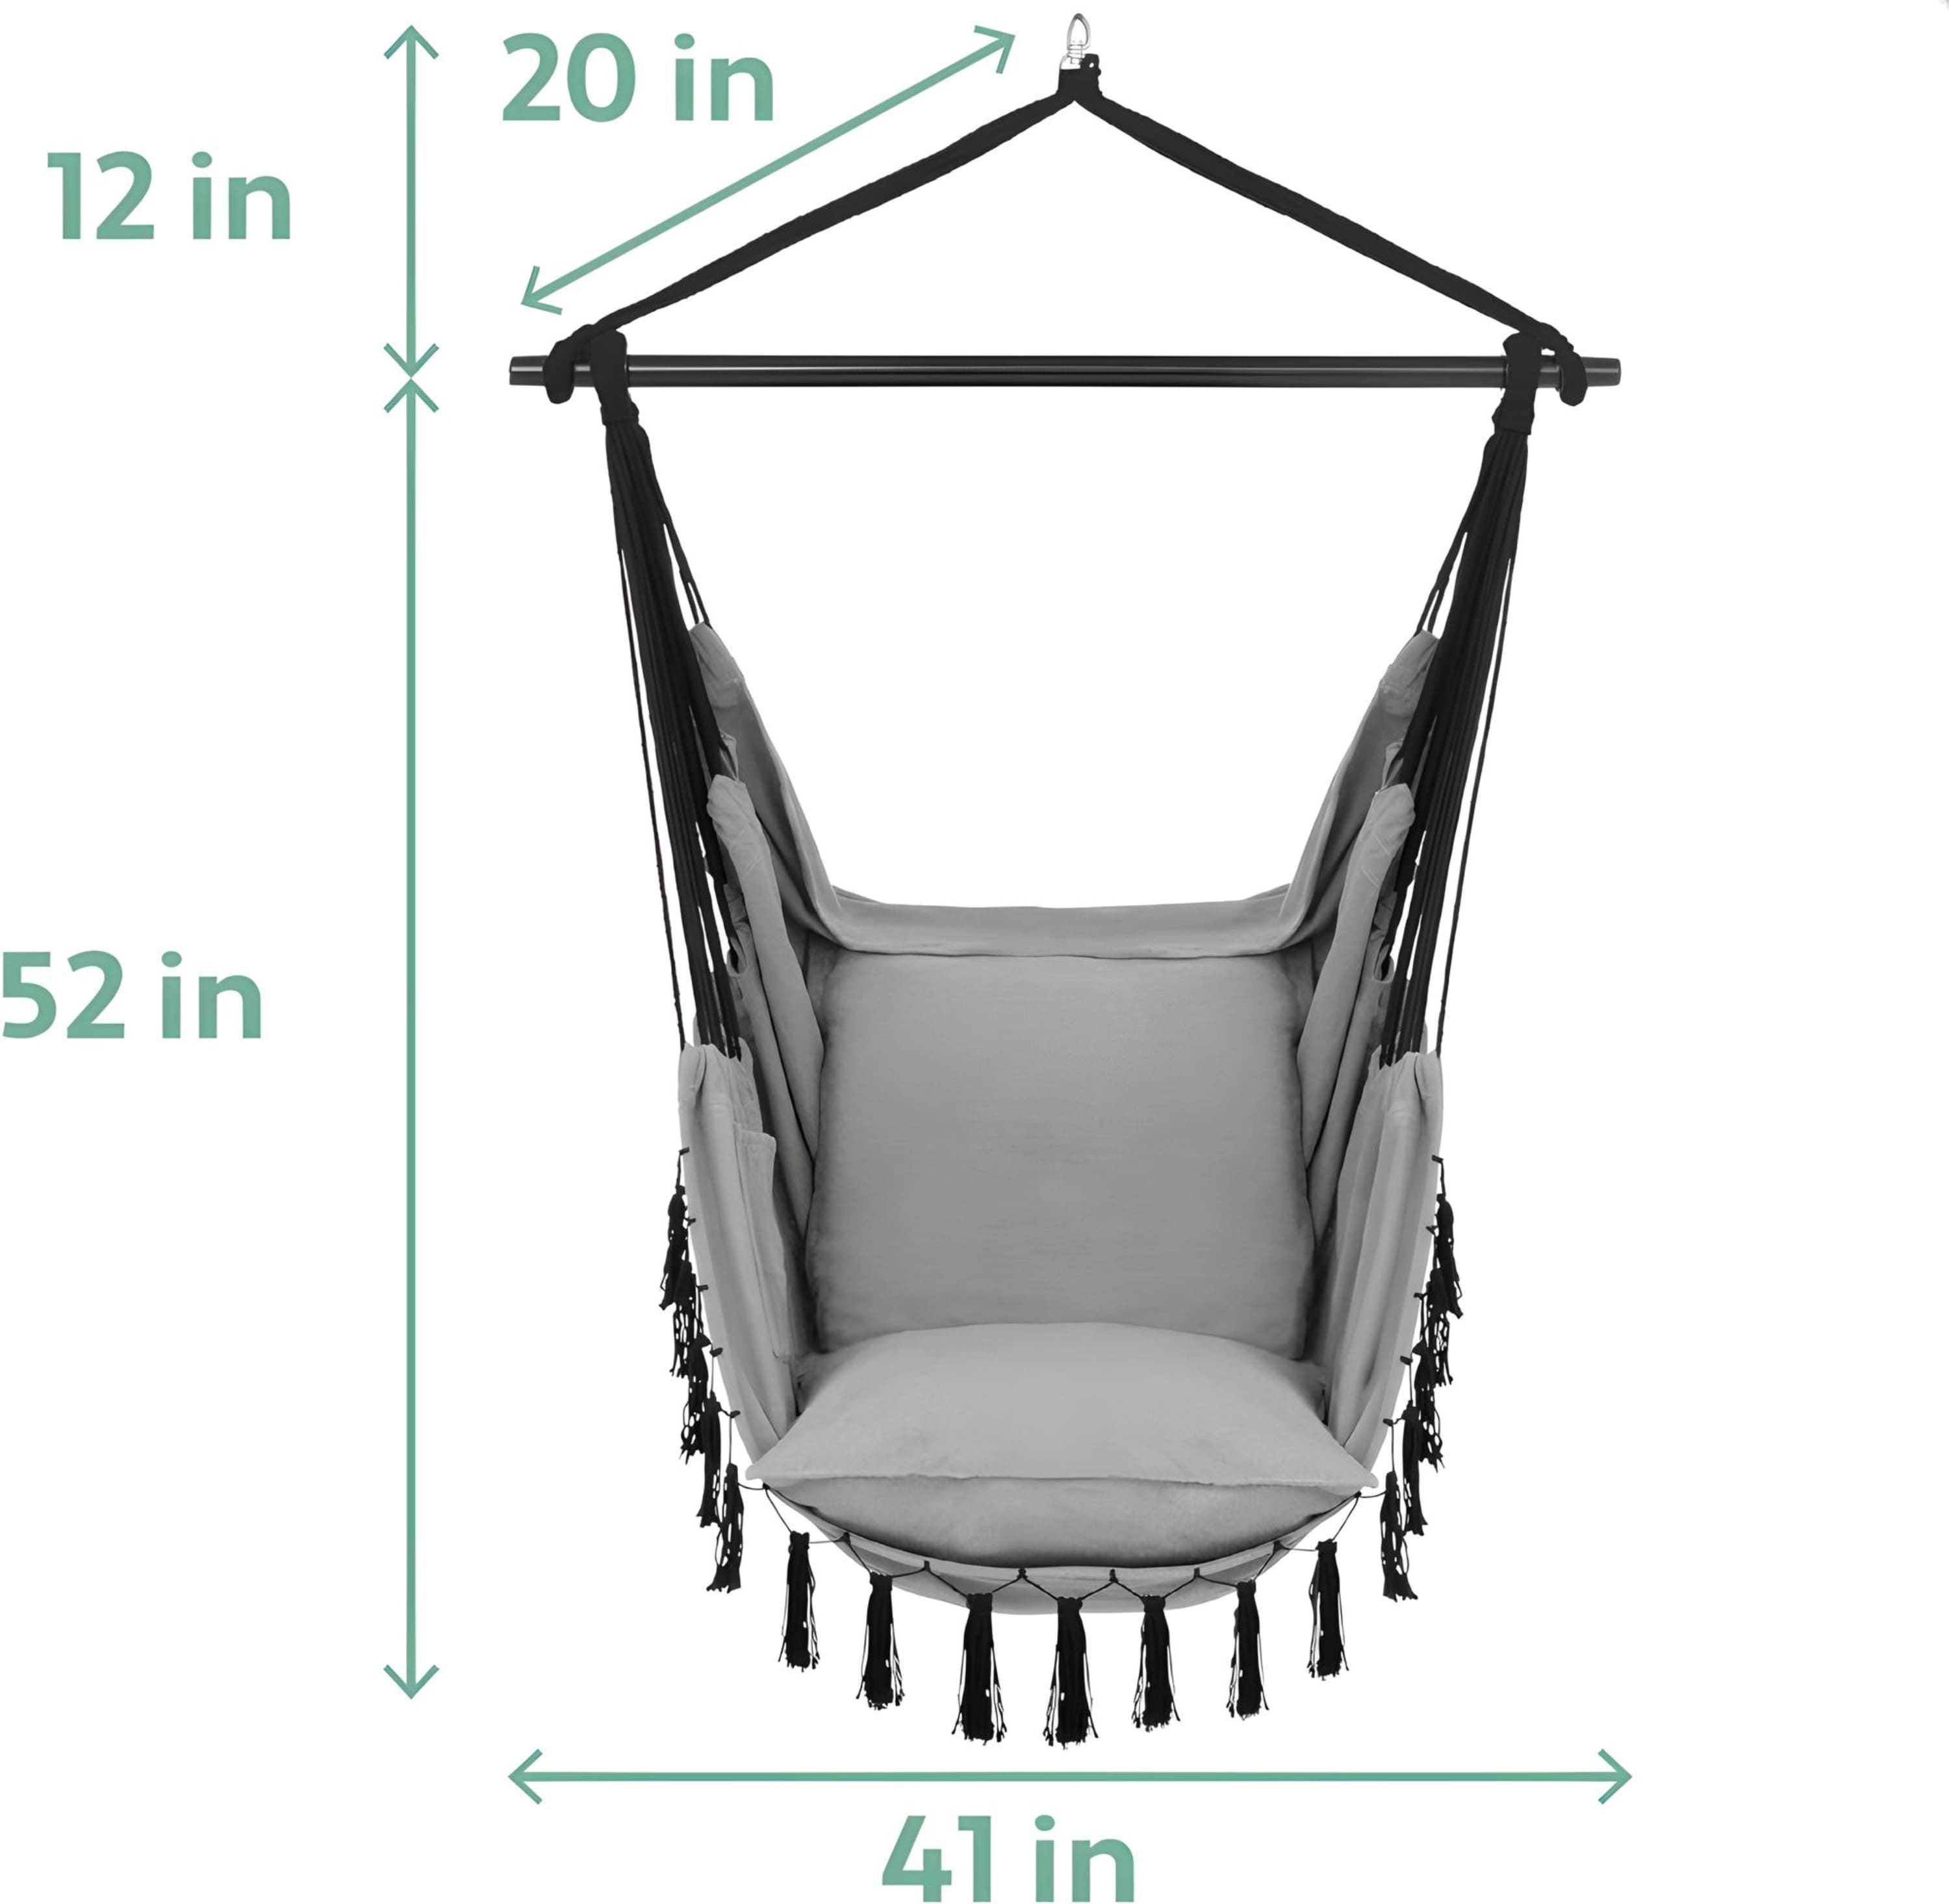 dimension-of-hanging-swing-chair